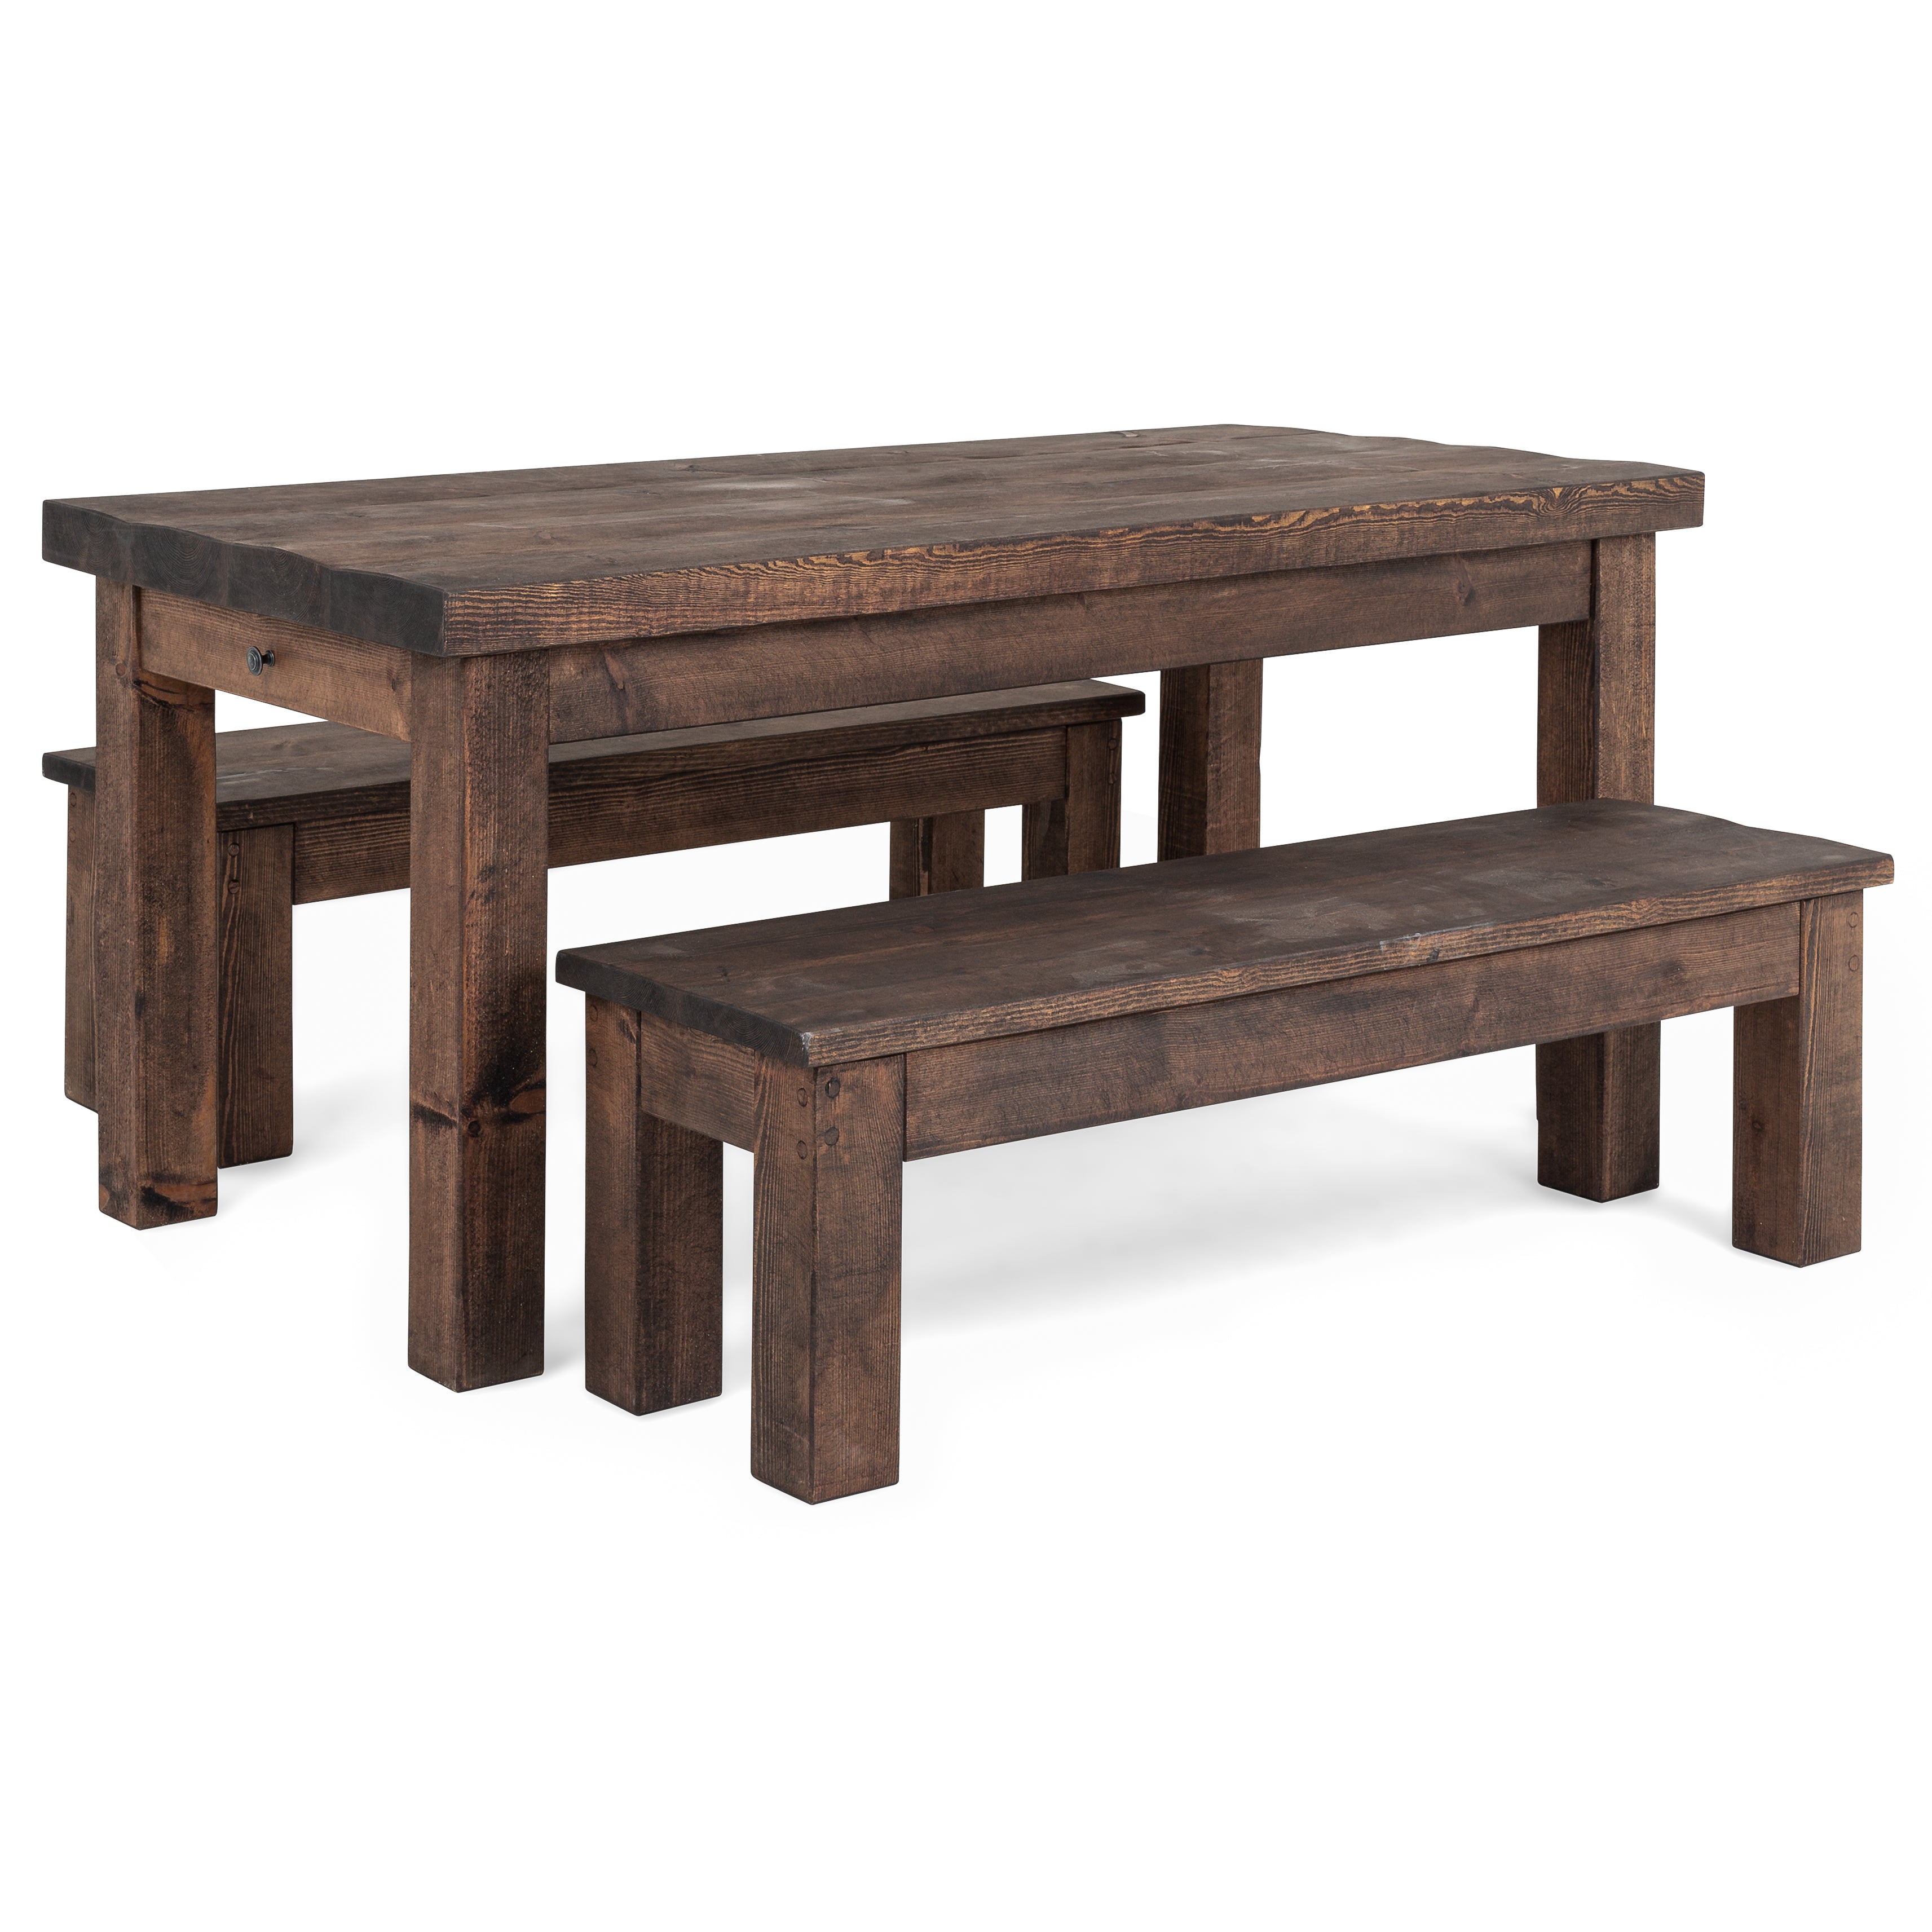 Wansbeck Dining Table And Benches With Storage